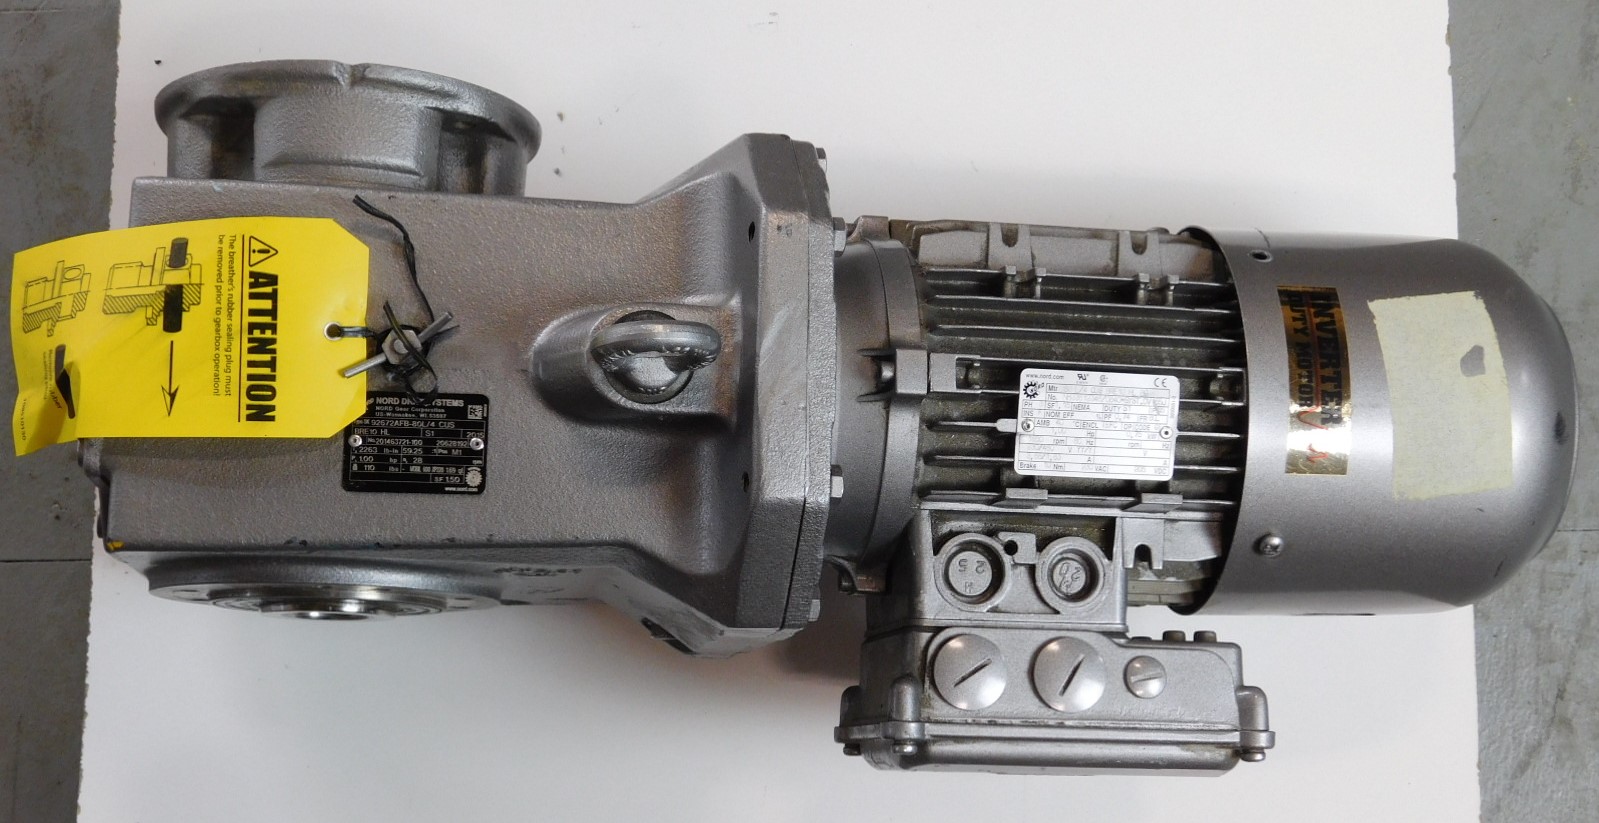 Nord Motor SK-80L//4CUS W// Nord 1 Hp Reducer SK 92672AFB-80L//4 CUS